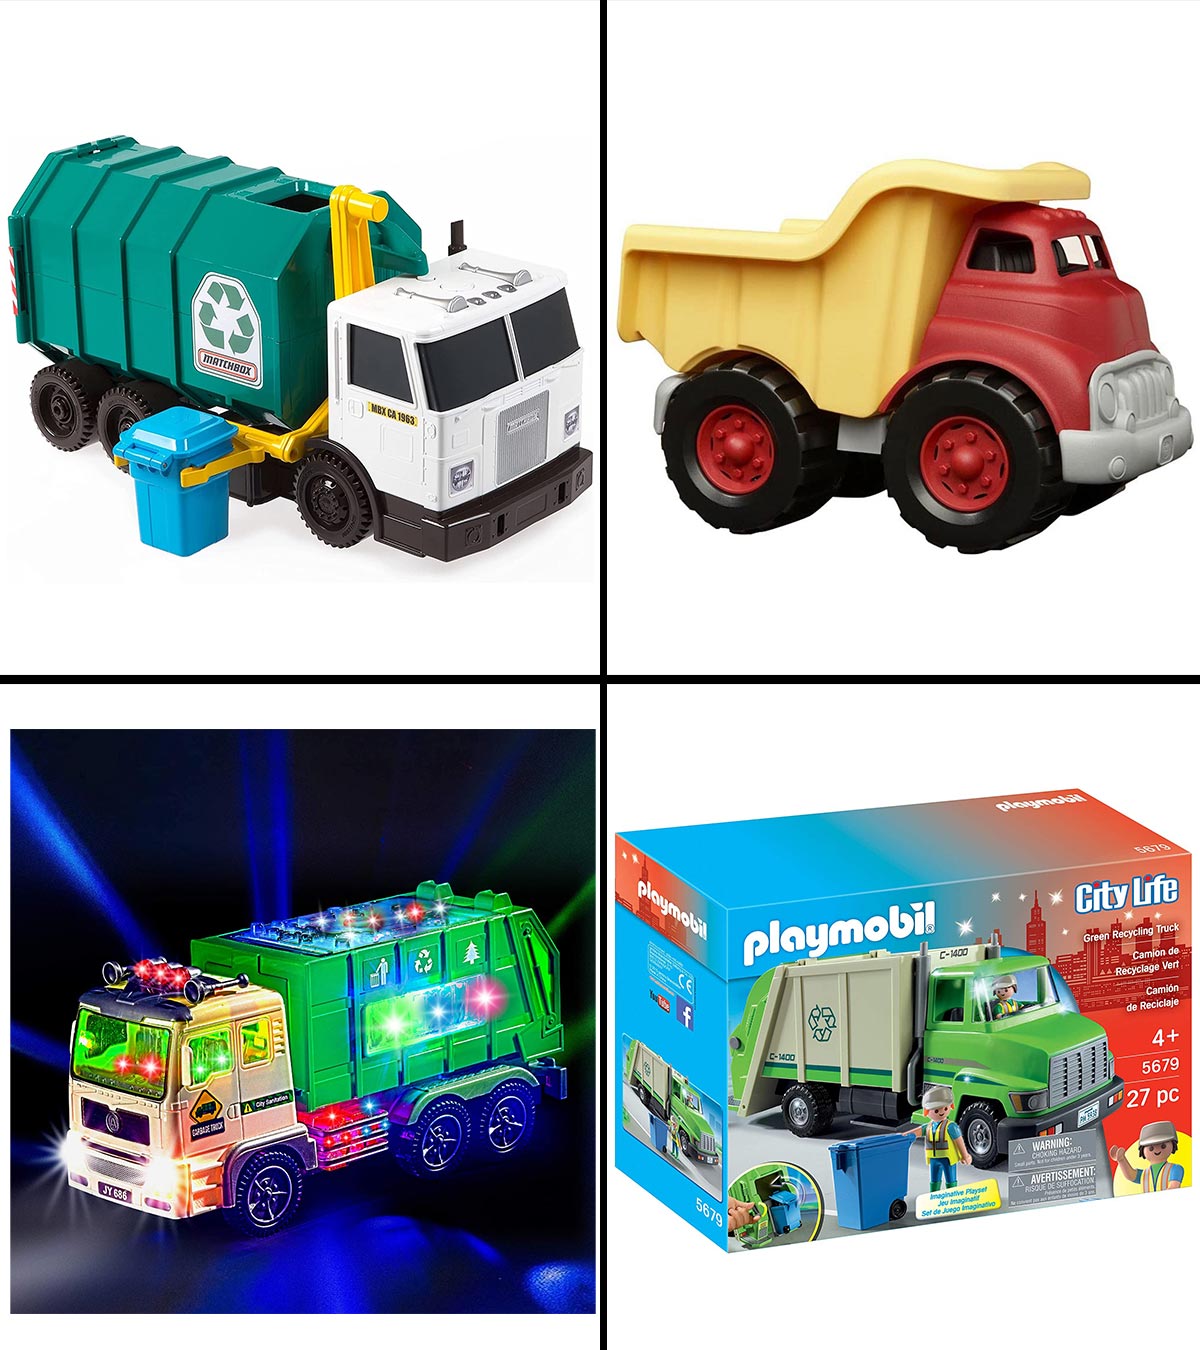 Xruison Garbage Truck Toy Large Rubbish Truck Recycling Car with 4D Lights and Sounds Educational LED Lightning Vehicle Toys Gifts for Kids Boys Girls 3 4 5 6 7 8